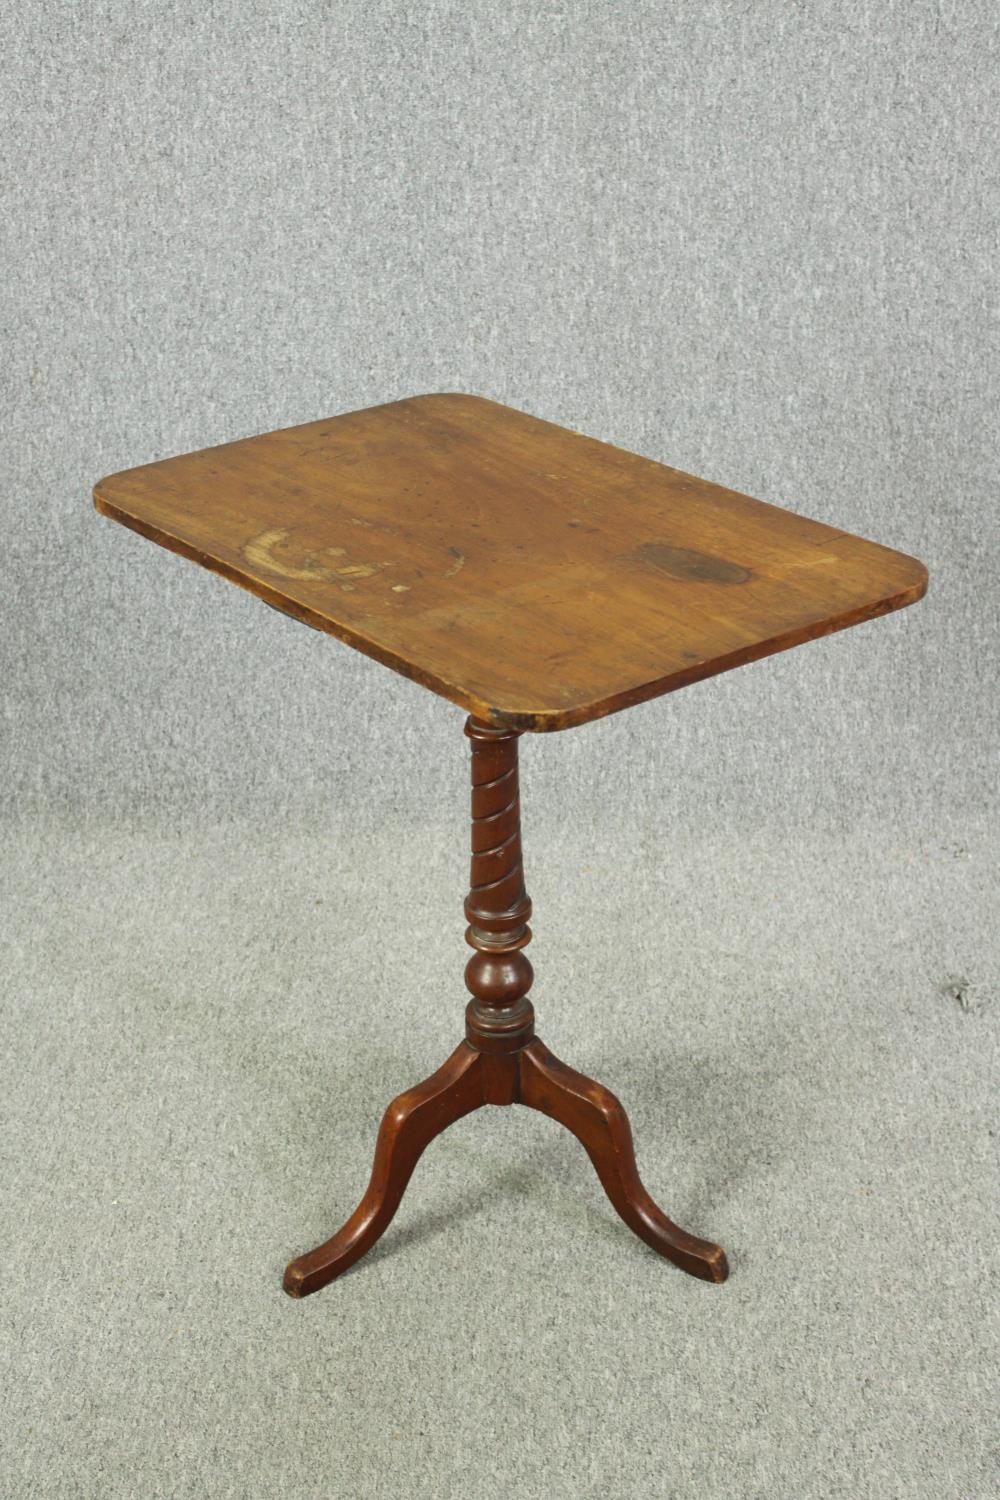 Occasional or lamp table, 19th century mahogany. H.71 W.66 D.43cm. - Image 4 of 6